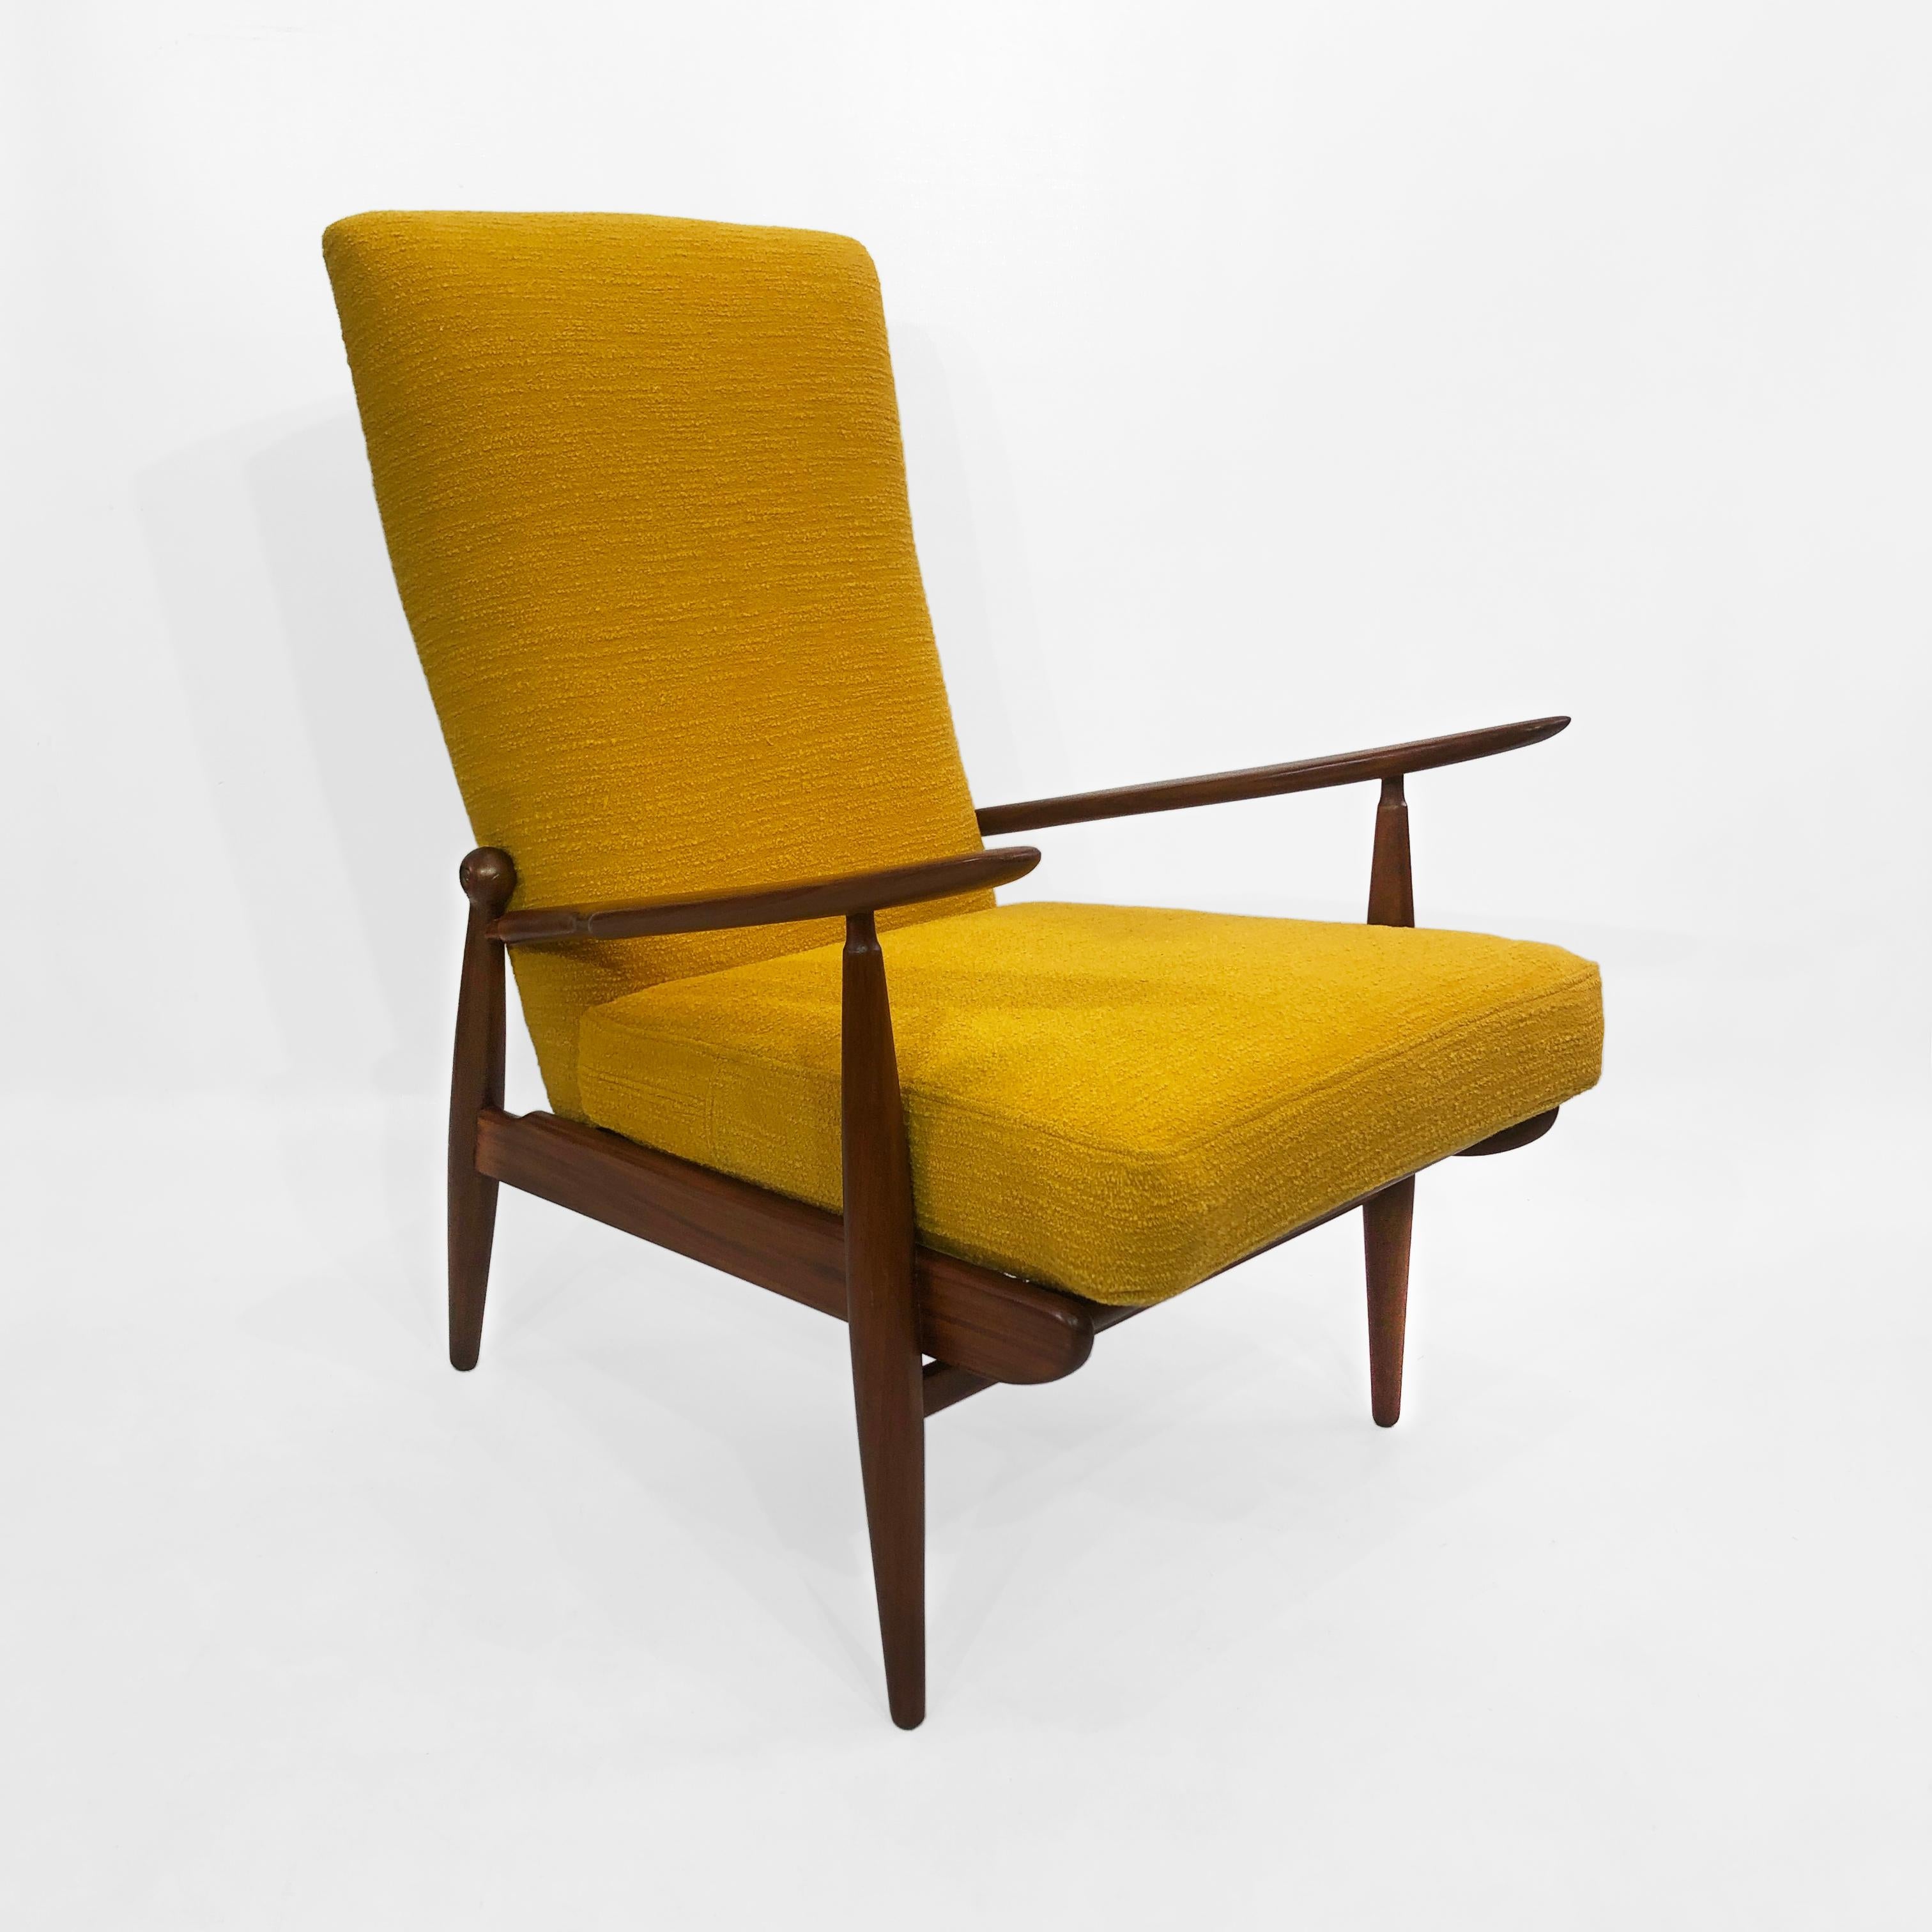 This high-backed Danish style yellow bouclé armchair, is a wonderful example of midcentury European design. The aerodynamic design and curves on the wood frame makes it an easy addition to any room. 

A refinished walnut wood frame houses a foam